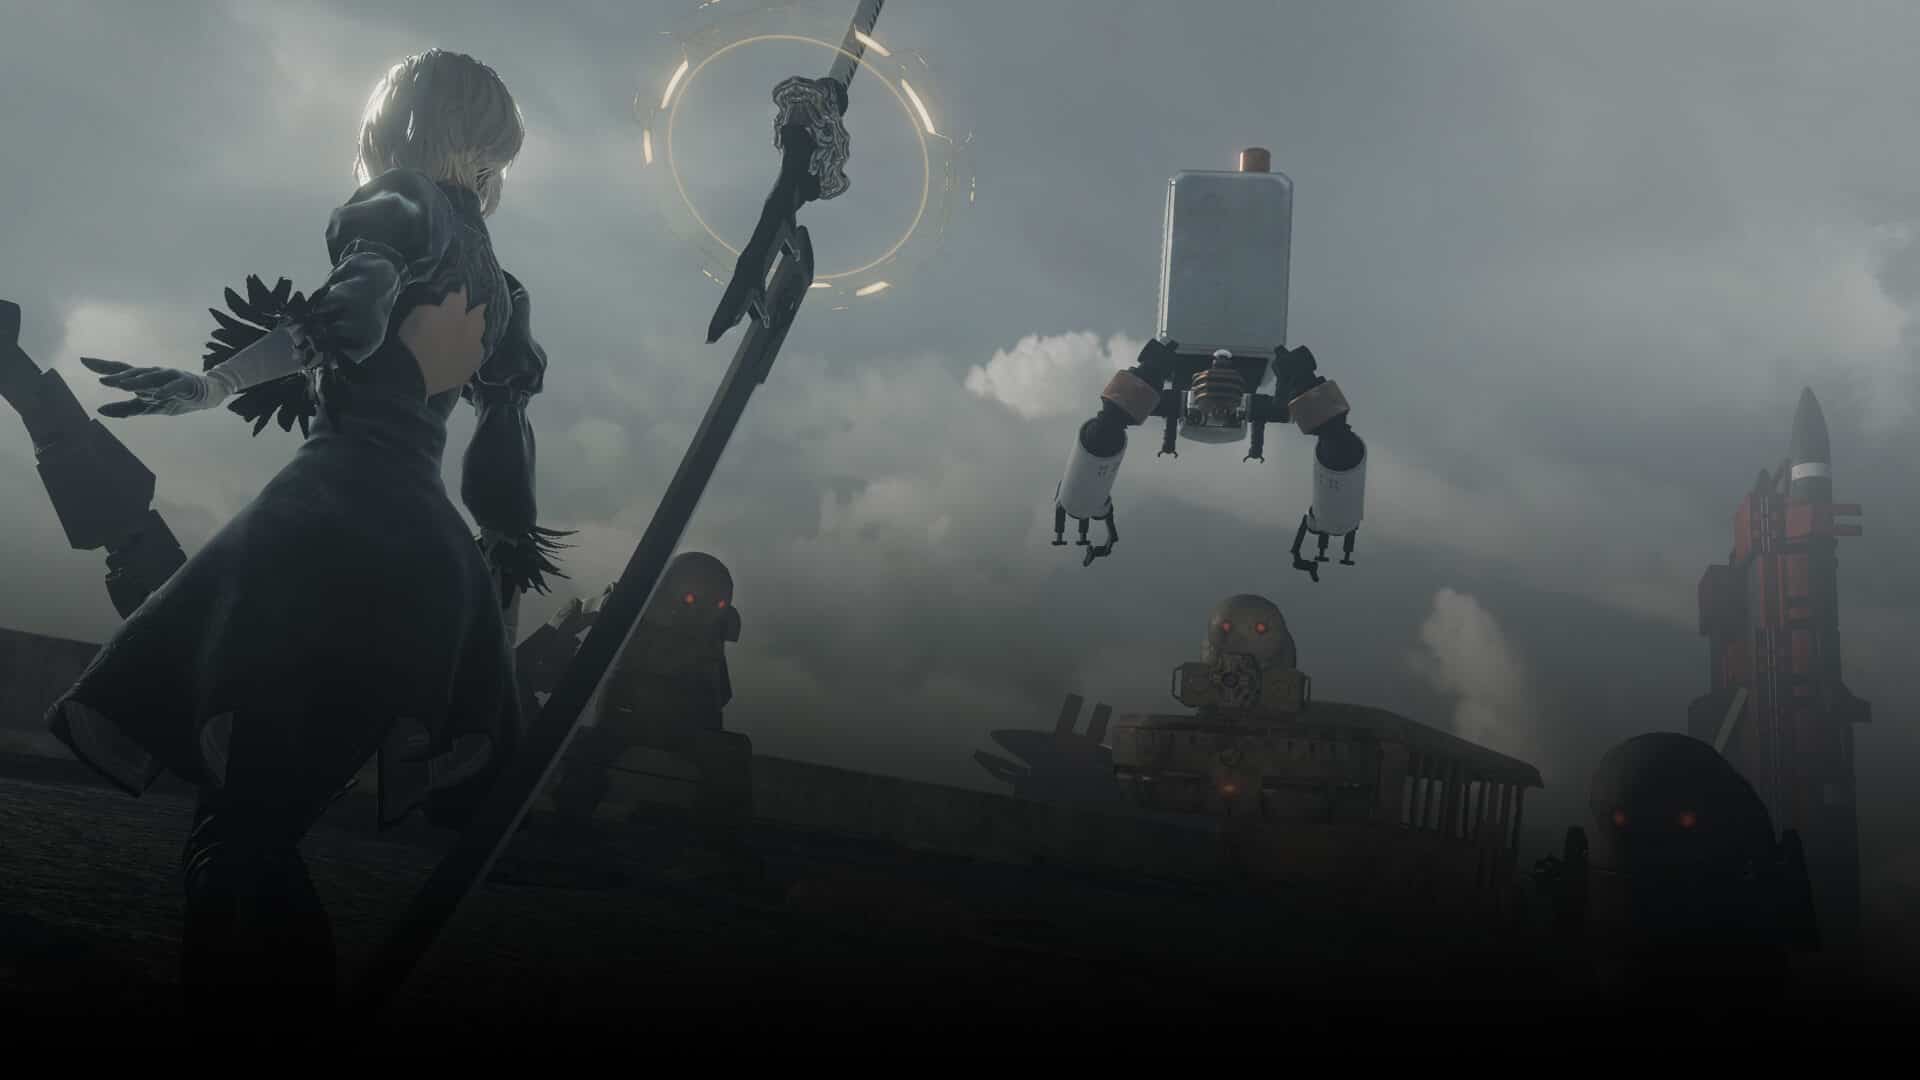 2B and her pod take on a group of enemies in Nier: Automata